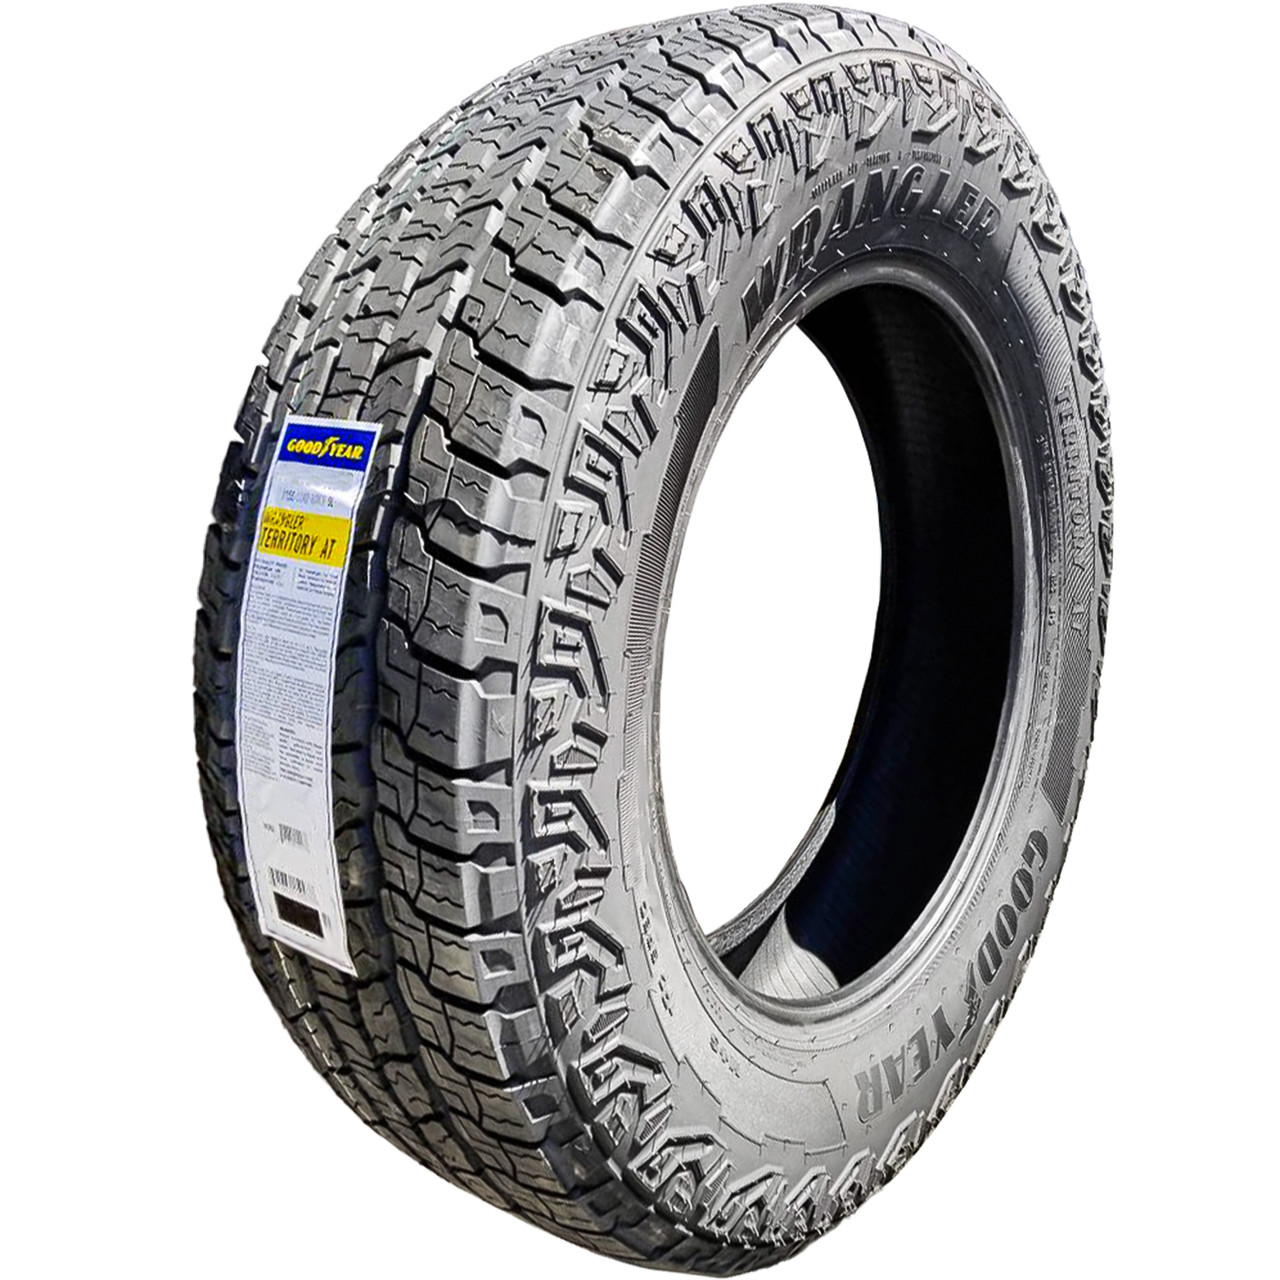 Goodyear Wrangler Territory A/T 275/60R20 115S AT All Terrain Tire